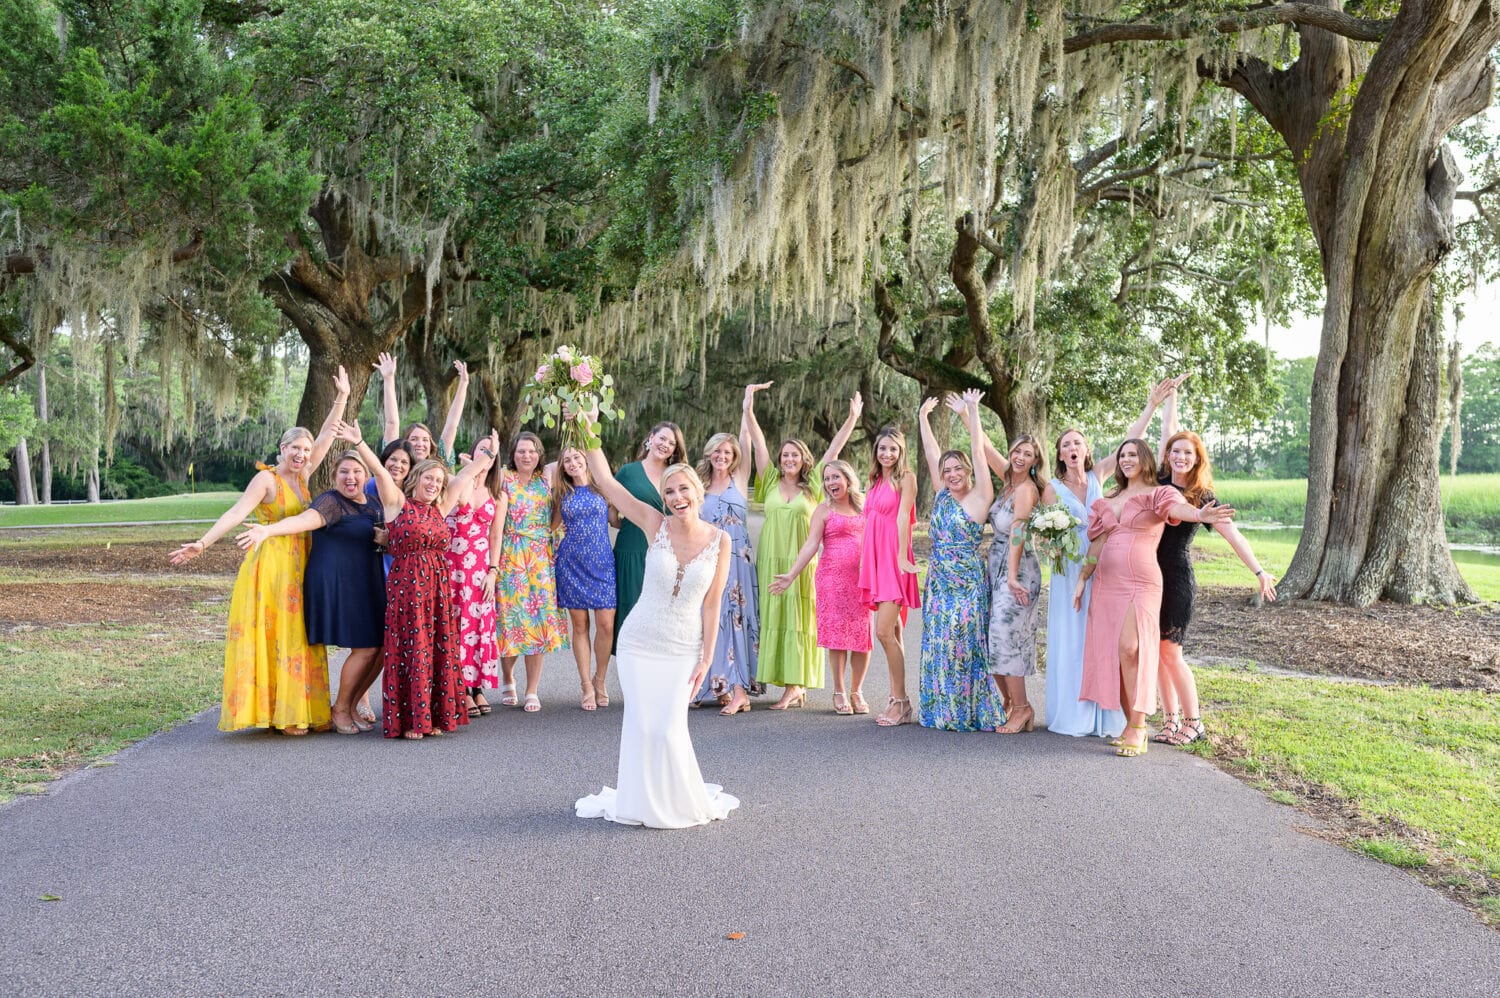 Bride with all her girlfriends cheering in the background - Caledonia Golf & Fish Club